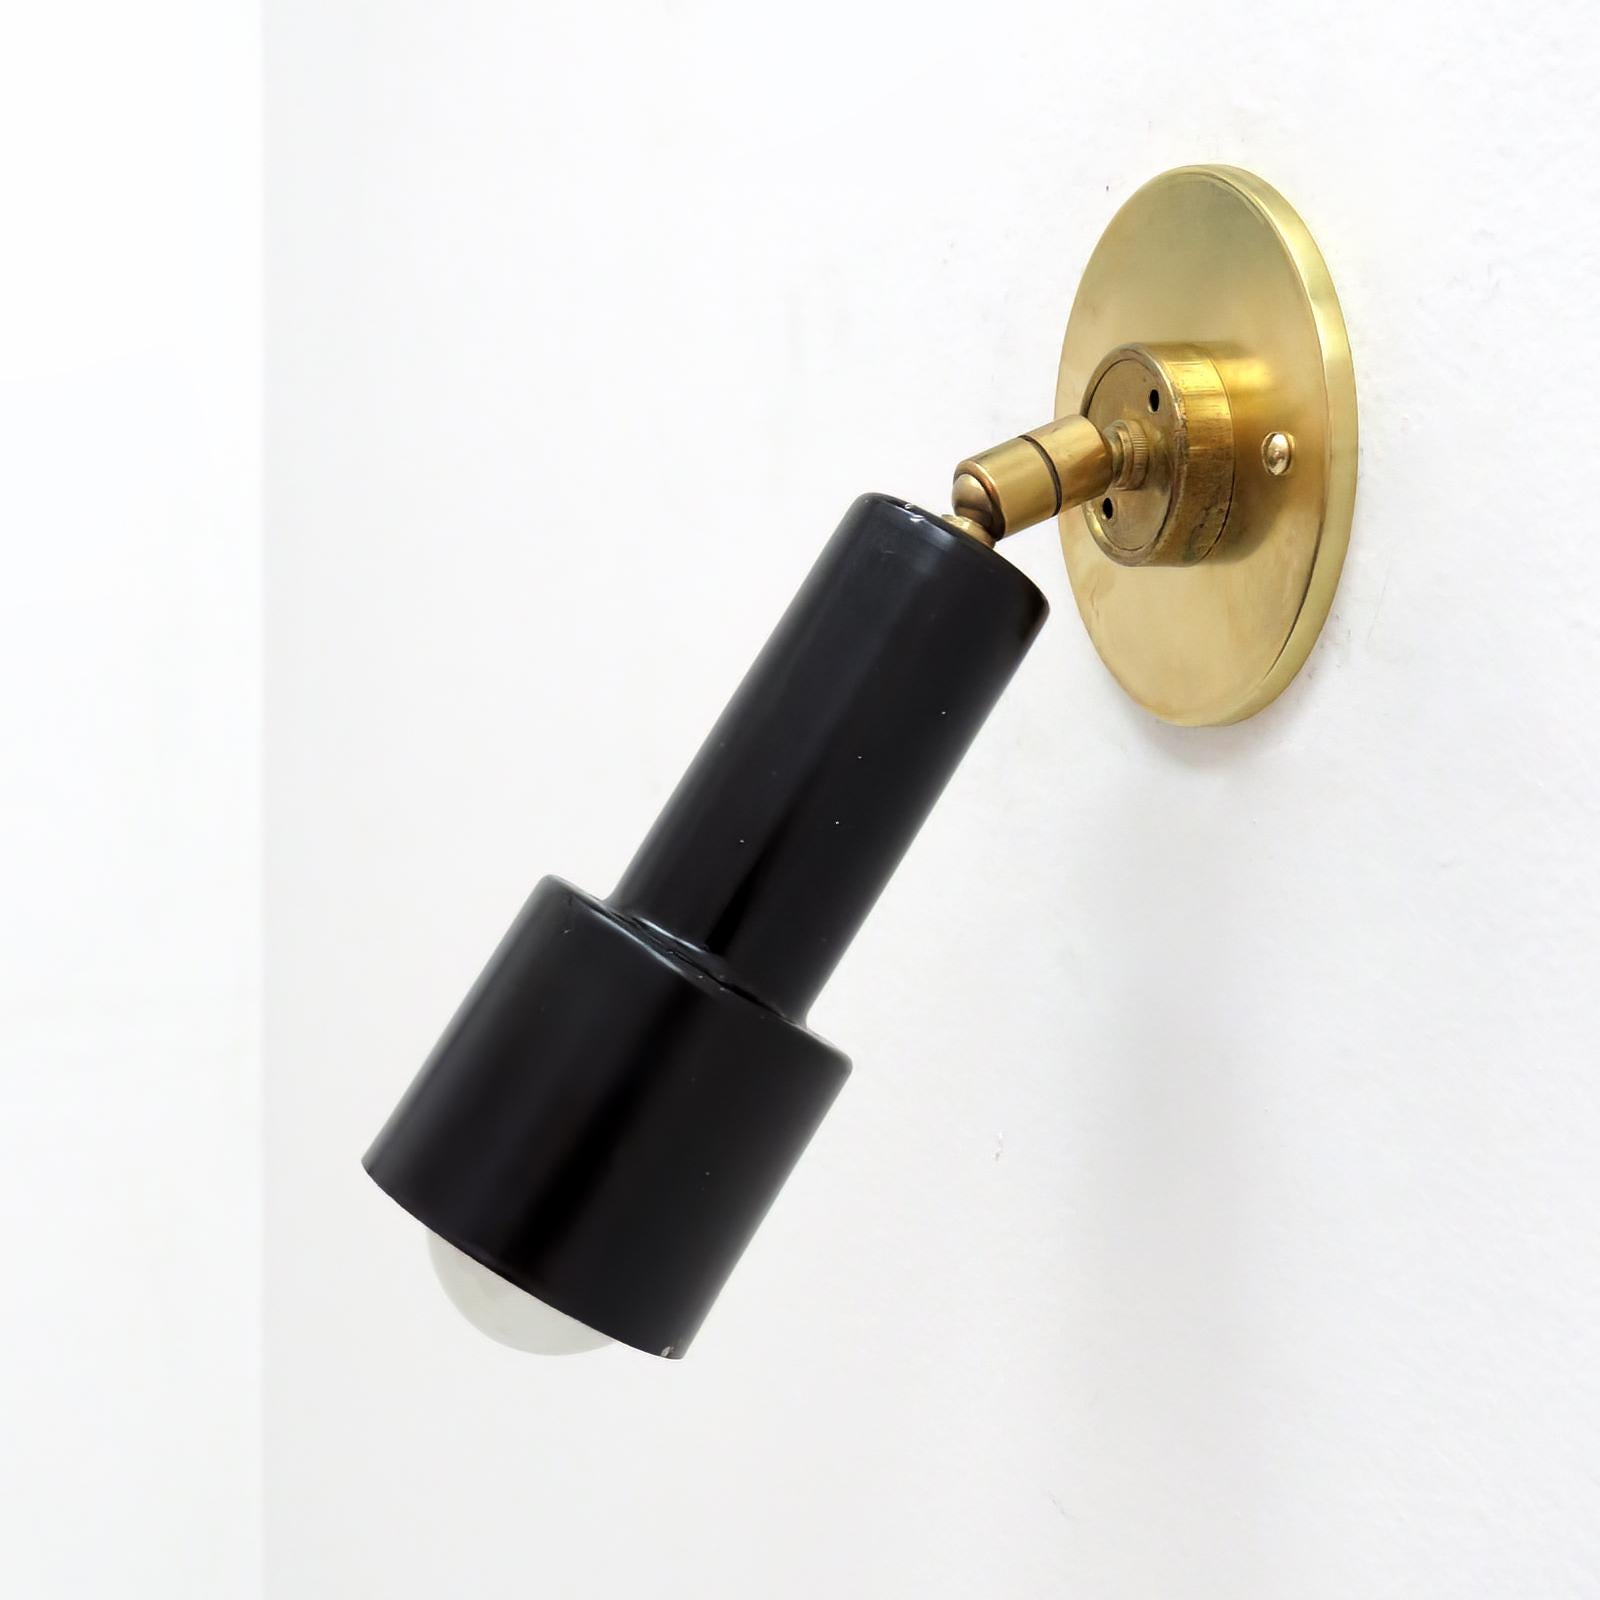 wonderful 1960s wall lights by Giuseppe Ostuni for Oluce attributed, articulated wall lights in black enameled metal and brass, fully adjustable. One E12 socket per fixture, max. wattage 75w each or LED equivalent, wired for US standards, bulbs